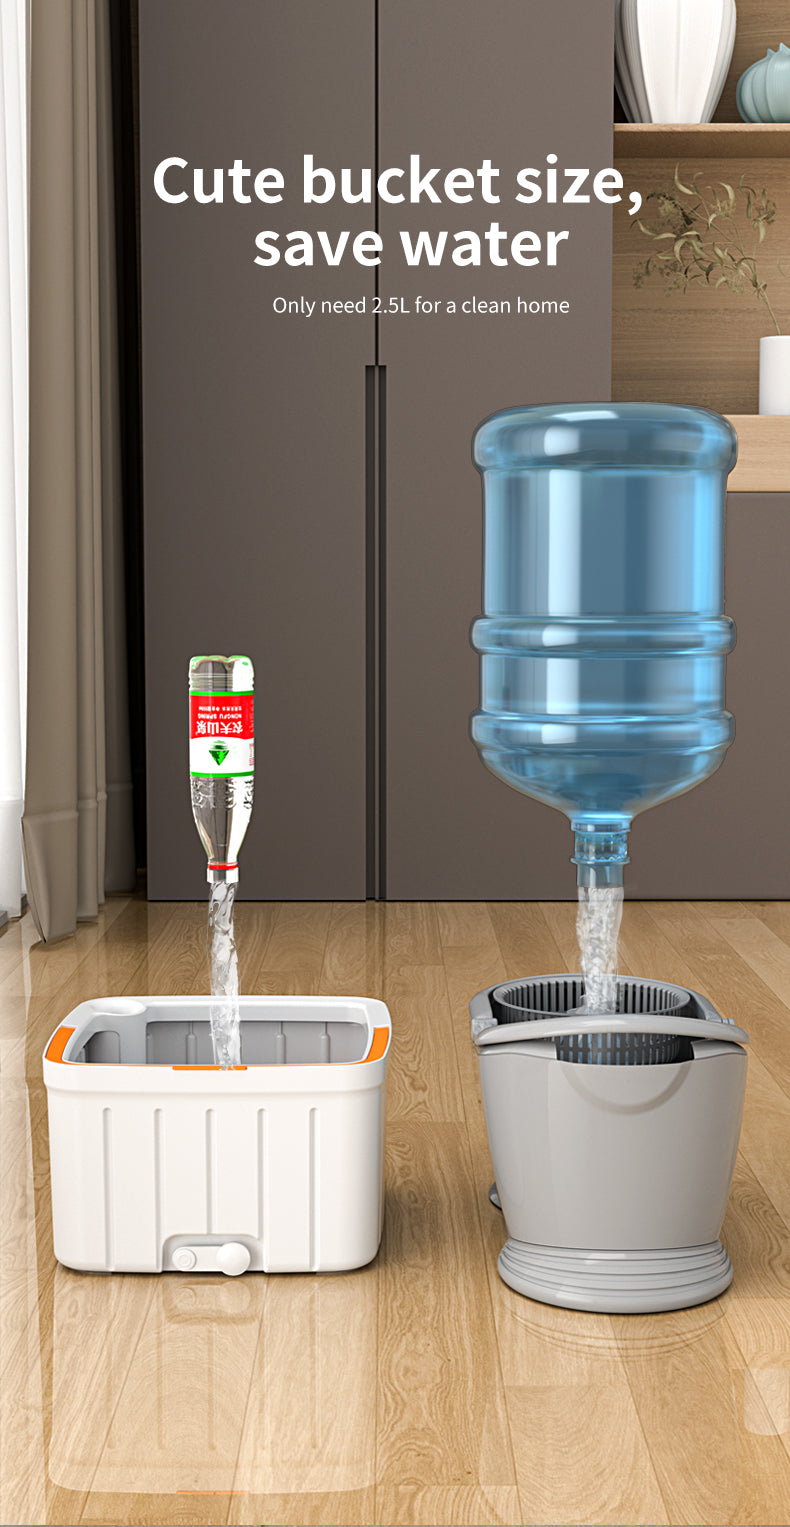 Self Wringing Spin Mop Bucket Set with Extendable Handle 3600 Swivel and 2x Microfibre Mop Heads - Upgraded